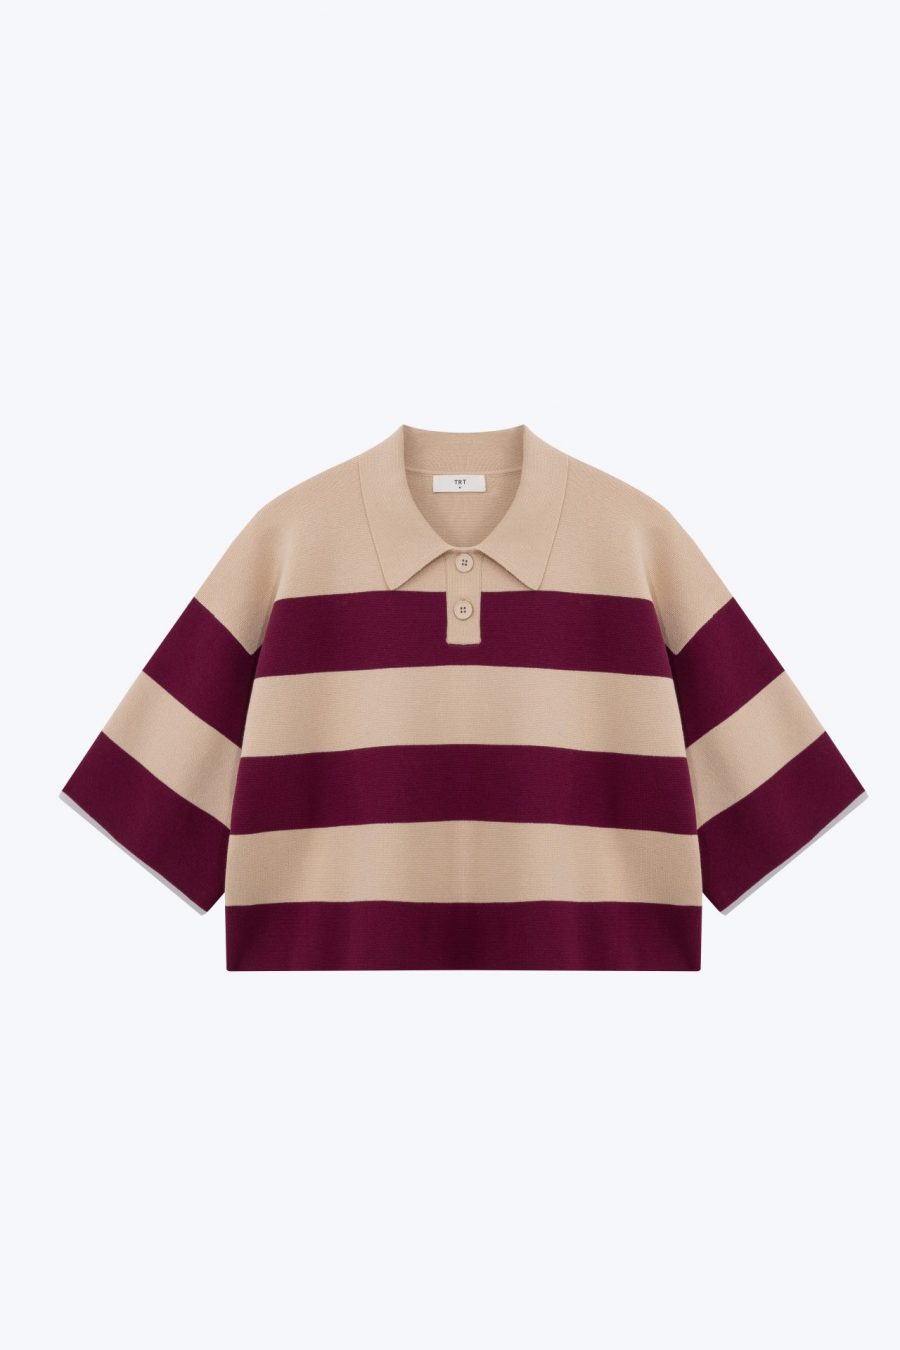 CK 01294 S KNITTED STRIPED RUGBY SWEATER PLUM